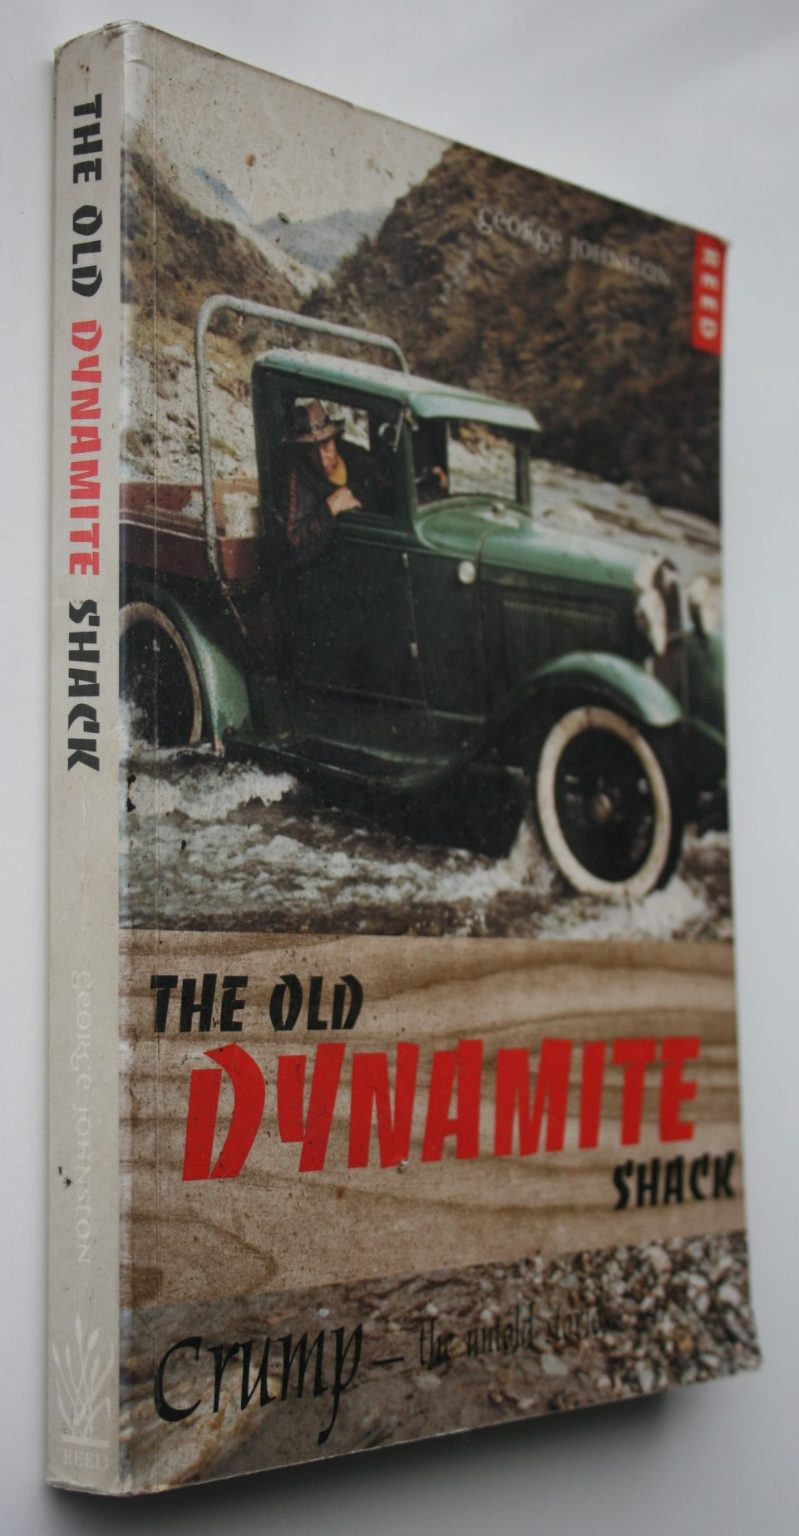 The Old Dynamite Shack (Crump: The Untold Stories) by George Johnston